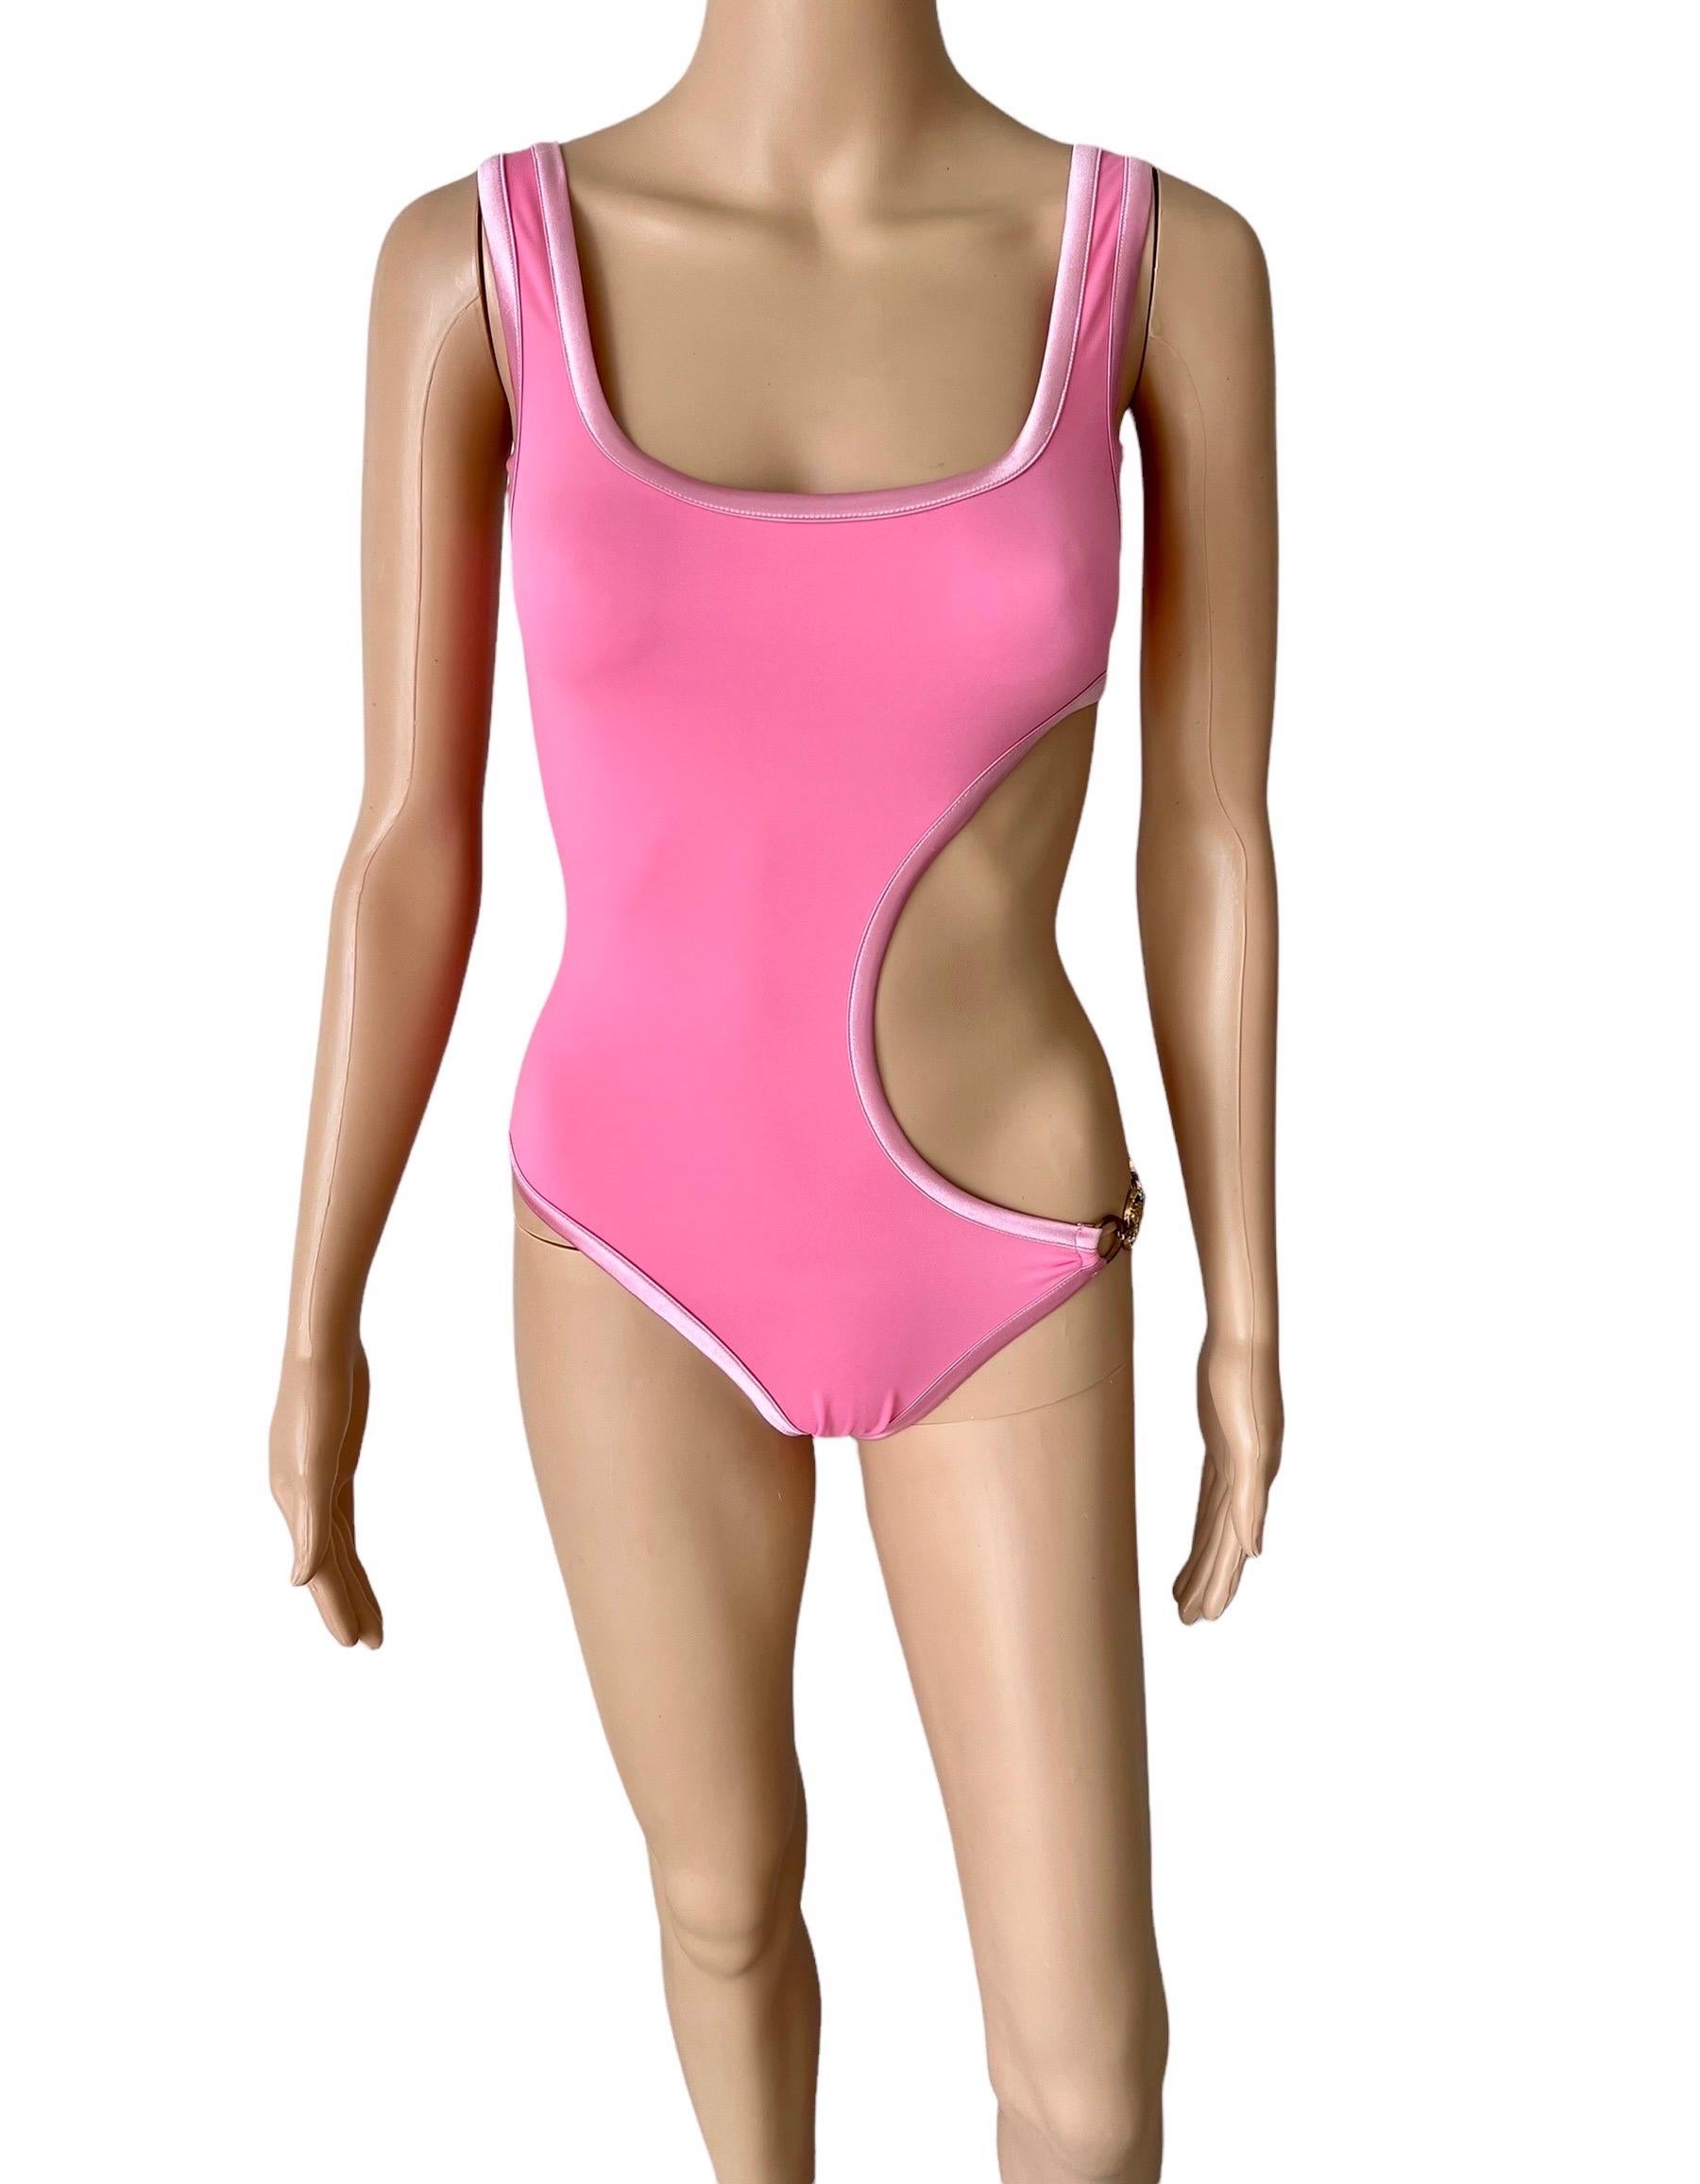 Versace S/S 2005 Cutout Crystal Embellished Logo One-Piece Swimwear Swimsuit In Excellent Condition For Sale In Naples, FL